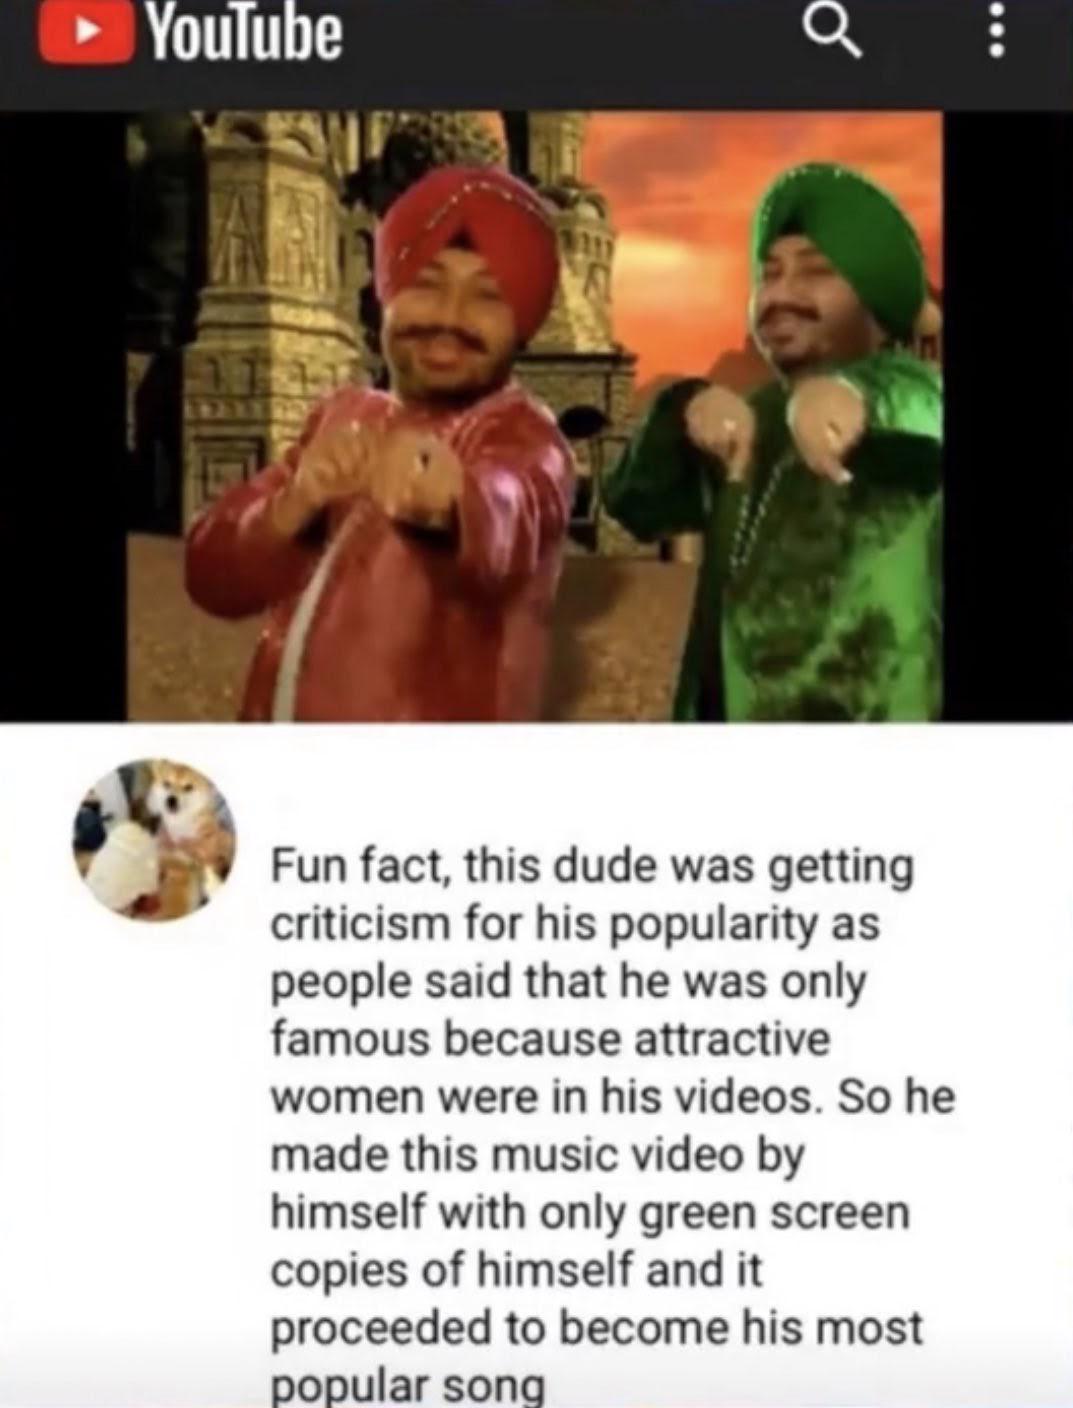 Internet meme - YouTube Fun fact, this dude was getting criticism for his popularity as people said that he was only famous because attractive women were in his videos. So he made this music video by himself with only green screen copies of himself and it